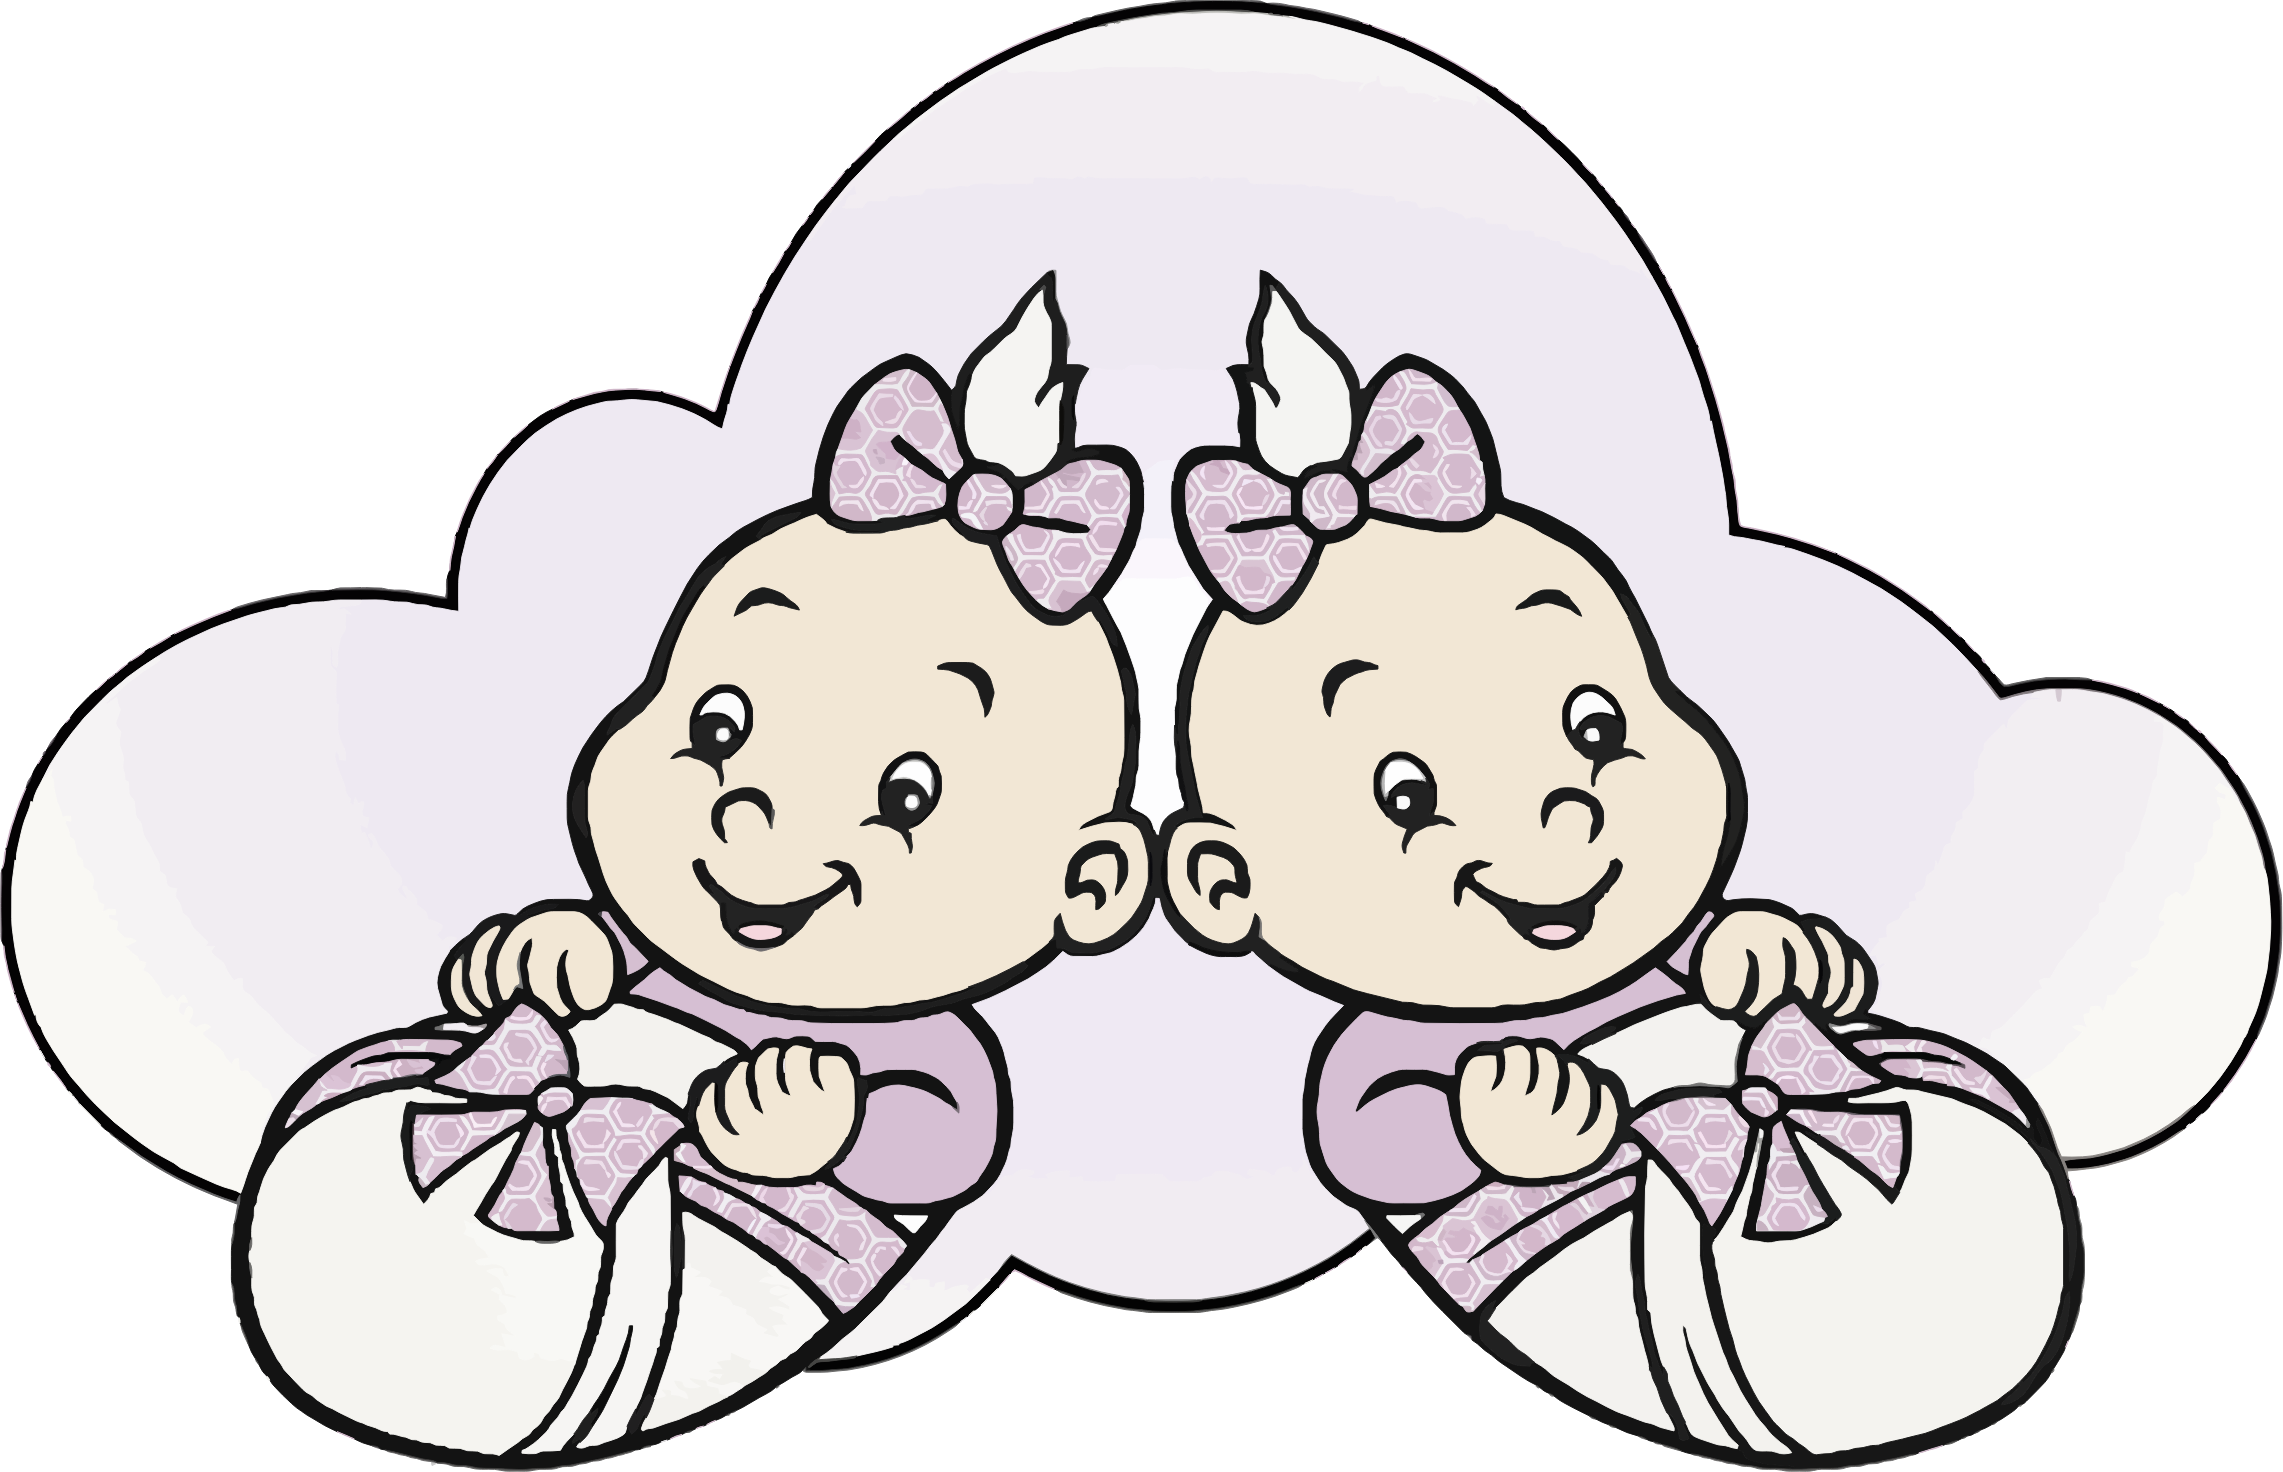 Two Girl Babies Vector Clipart image - Free stock photo - Public Domain  photo - CC0 Images